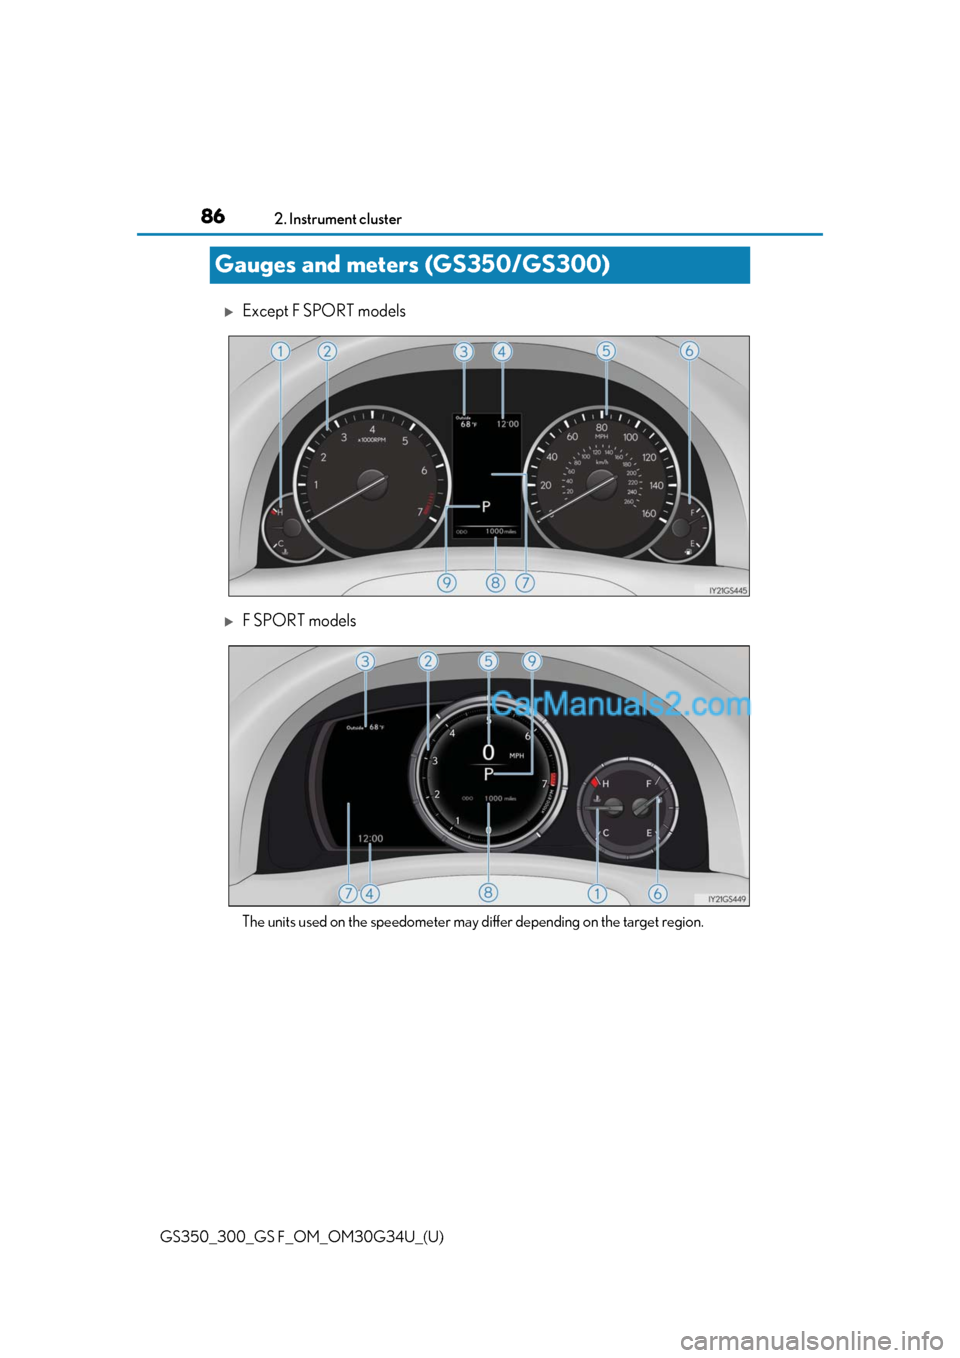 Lexus GS300 2018  s Manual Online 86
GS350_300_GS F_OM_OM30G34U_(U)2. Instrument cluster
Gauges and meters (GS350/GS300)
Except F SPORT models
F SPORT models
The units used on the speedometer may differ depending on the target r